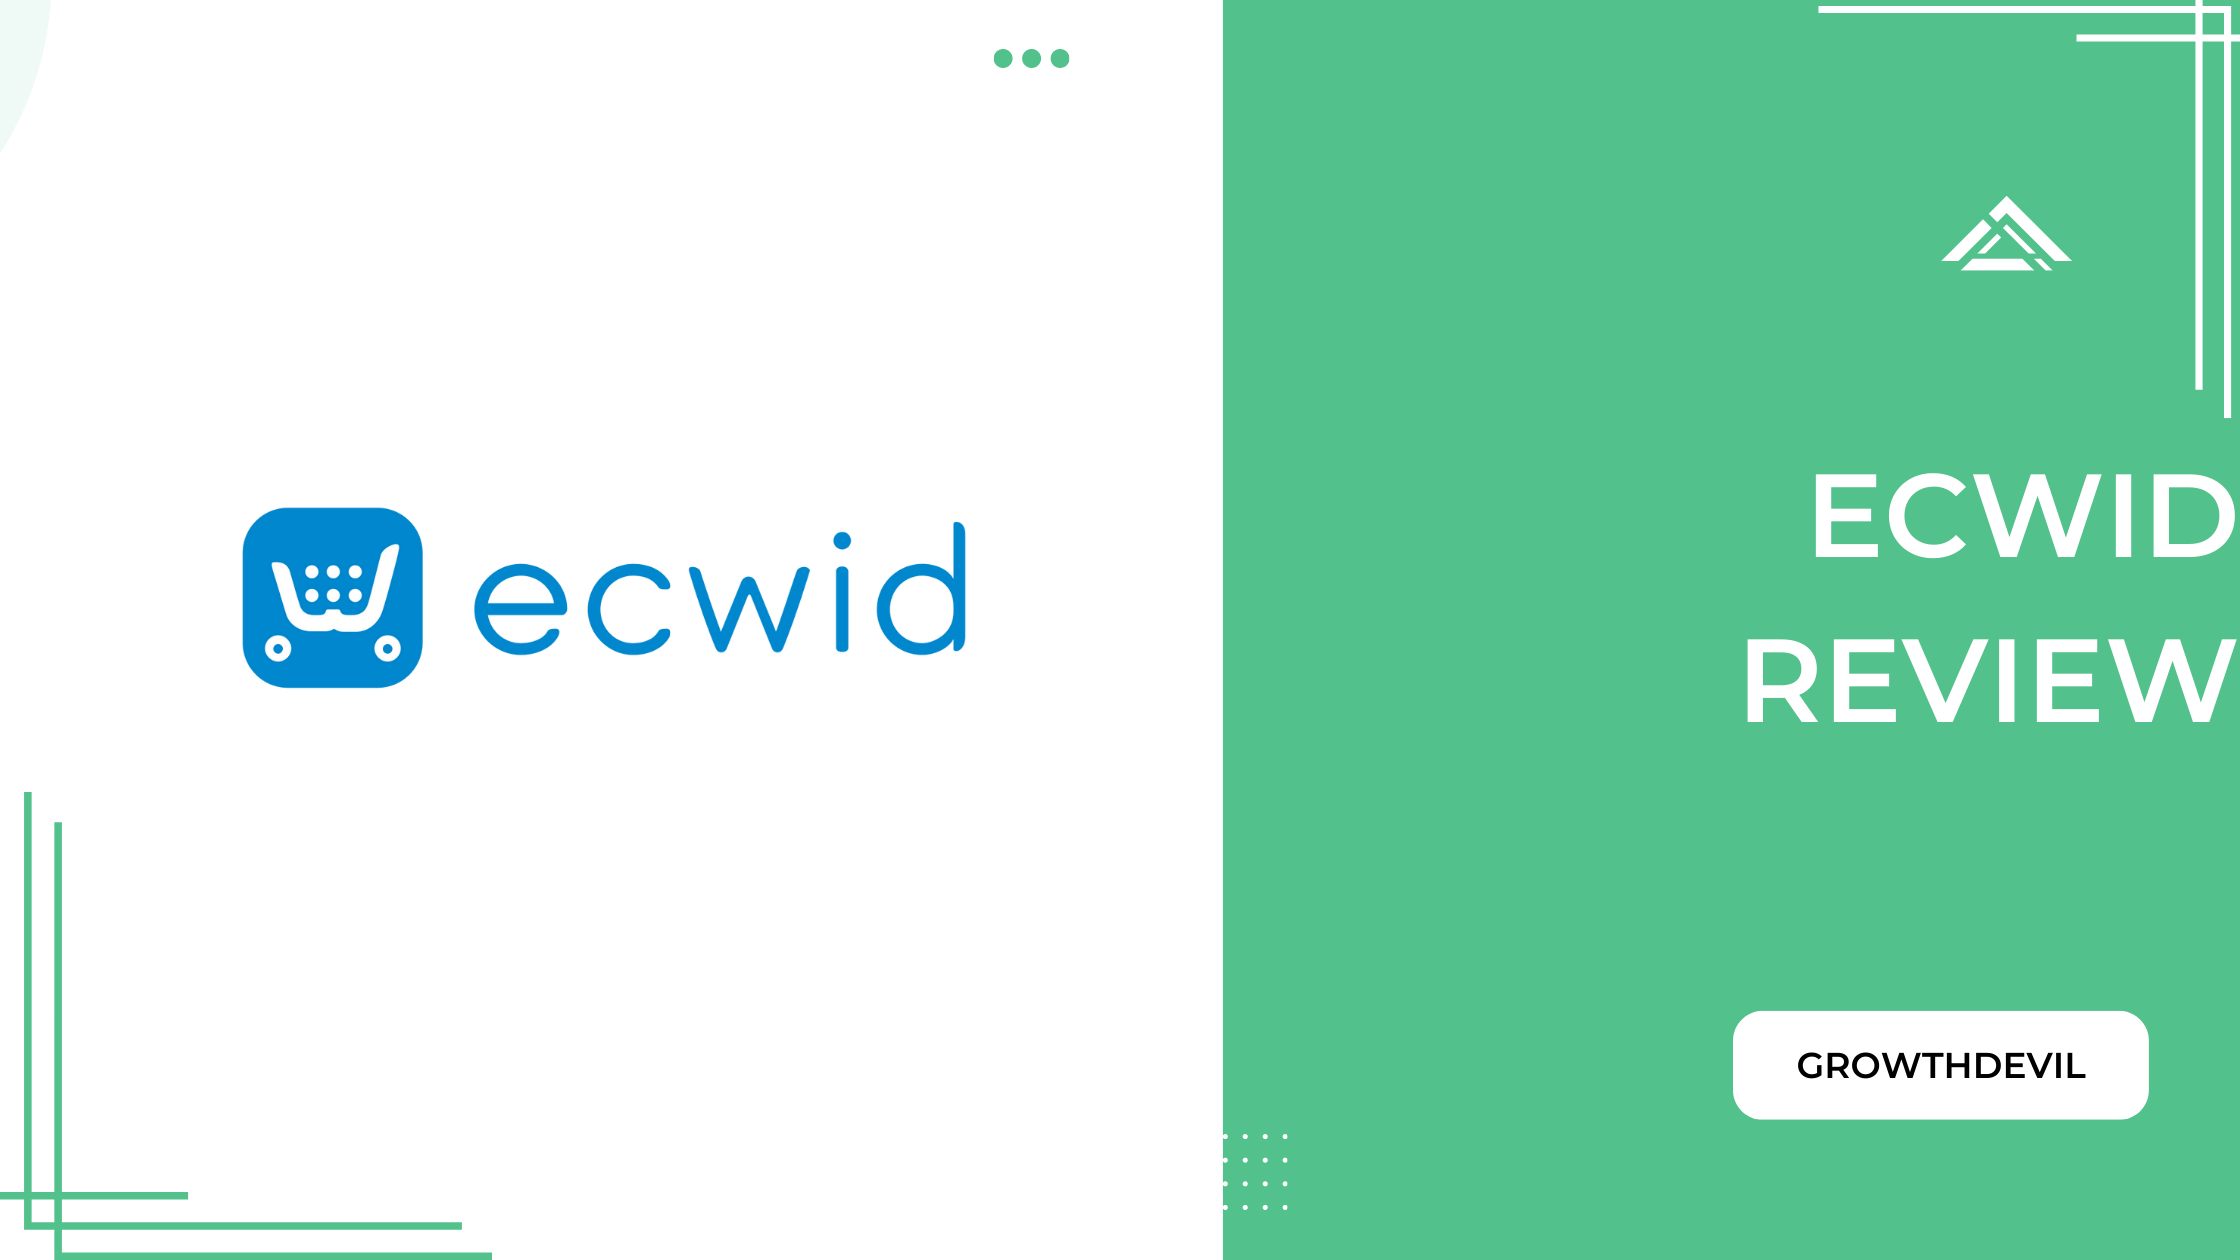 Ecwid Review - GrowthDevil